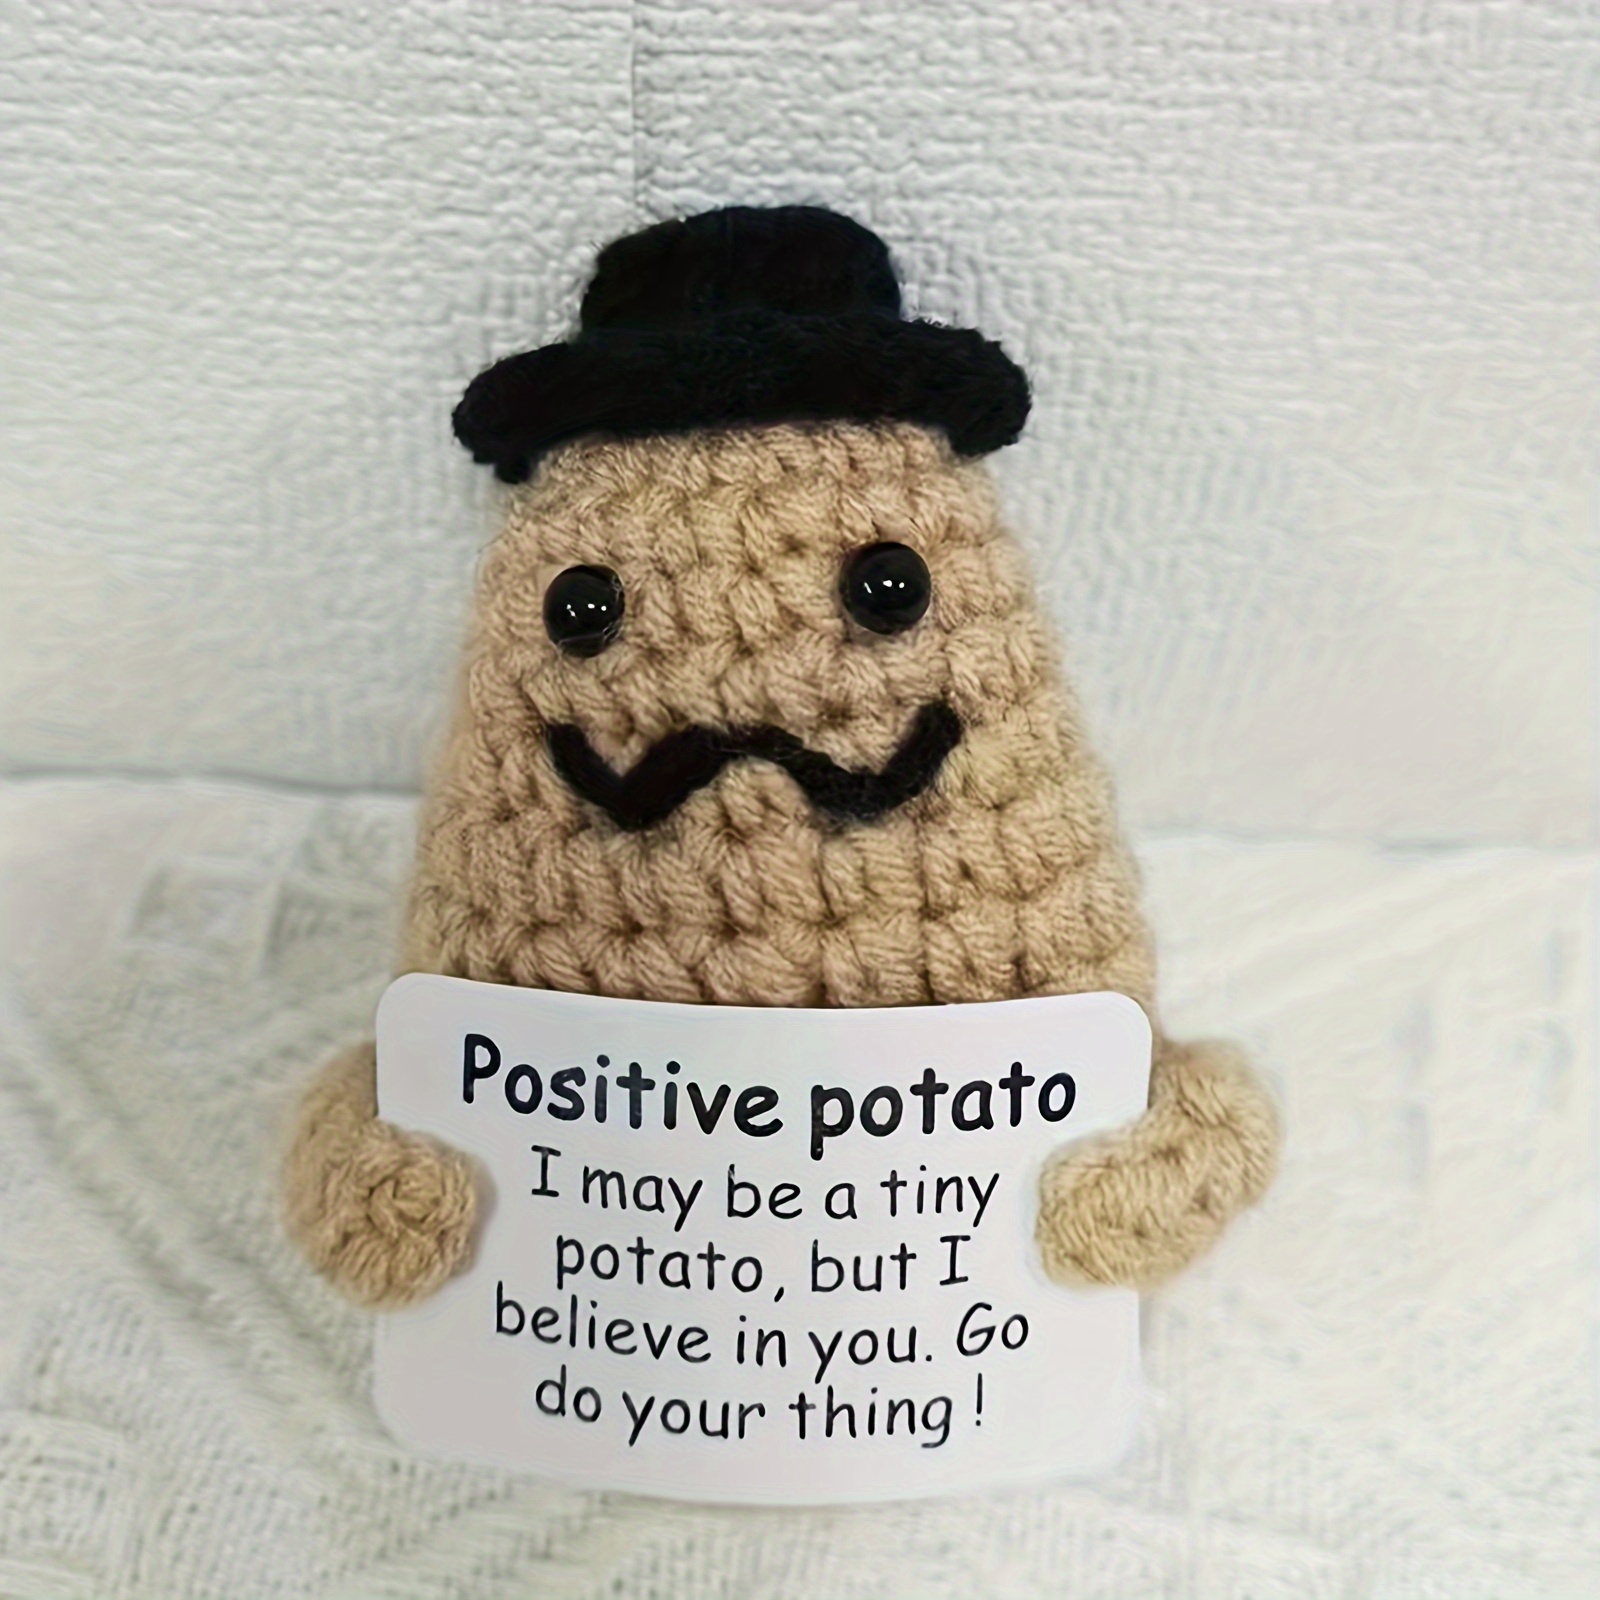  Mini Funny Positive Potato with Wood Base, 3 inch Knitted  Potato Toy with Positive Card Creative Cute Wool Positive Potato Crochet  Doll Cheer Up Gifts for Friends Party Decoration Encouragement 